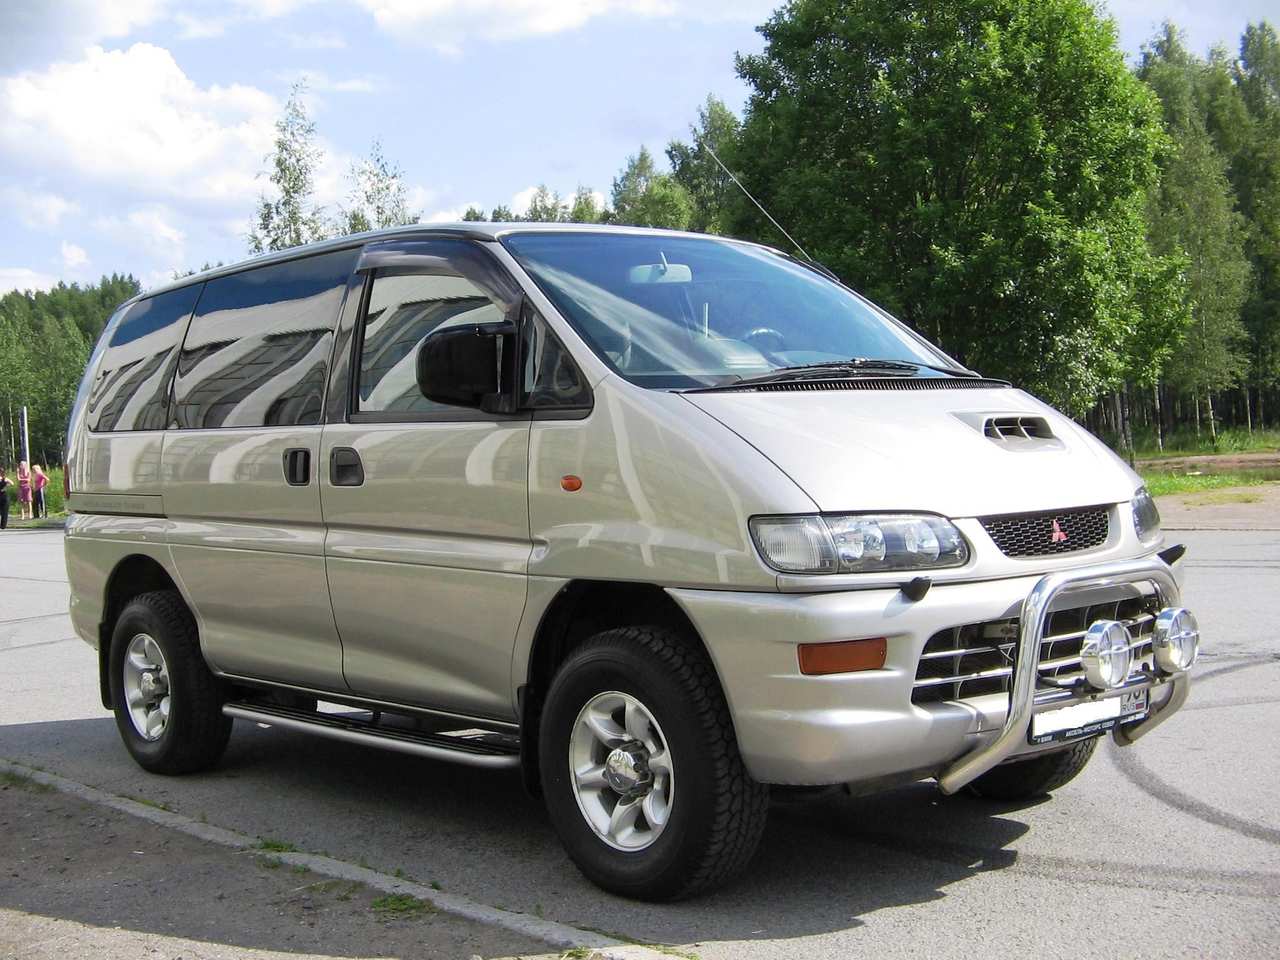 2000 Mitsubishi Space GEAR For Sale, 2.5, Diesel, Manual